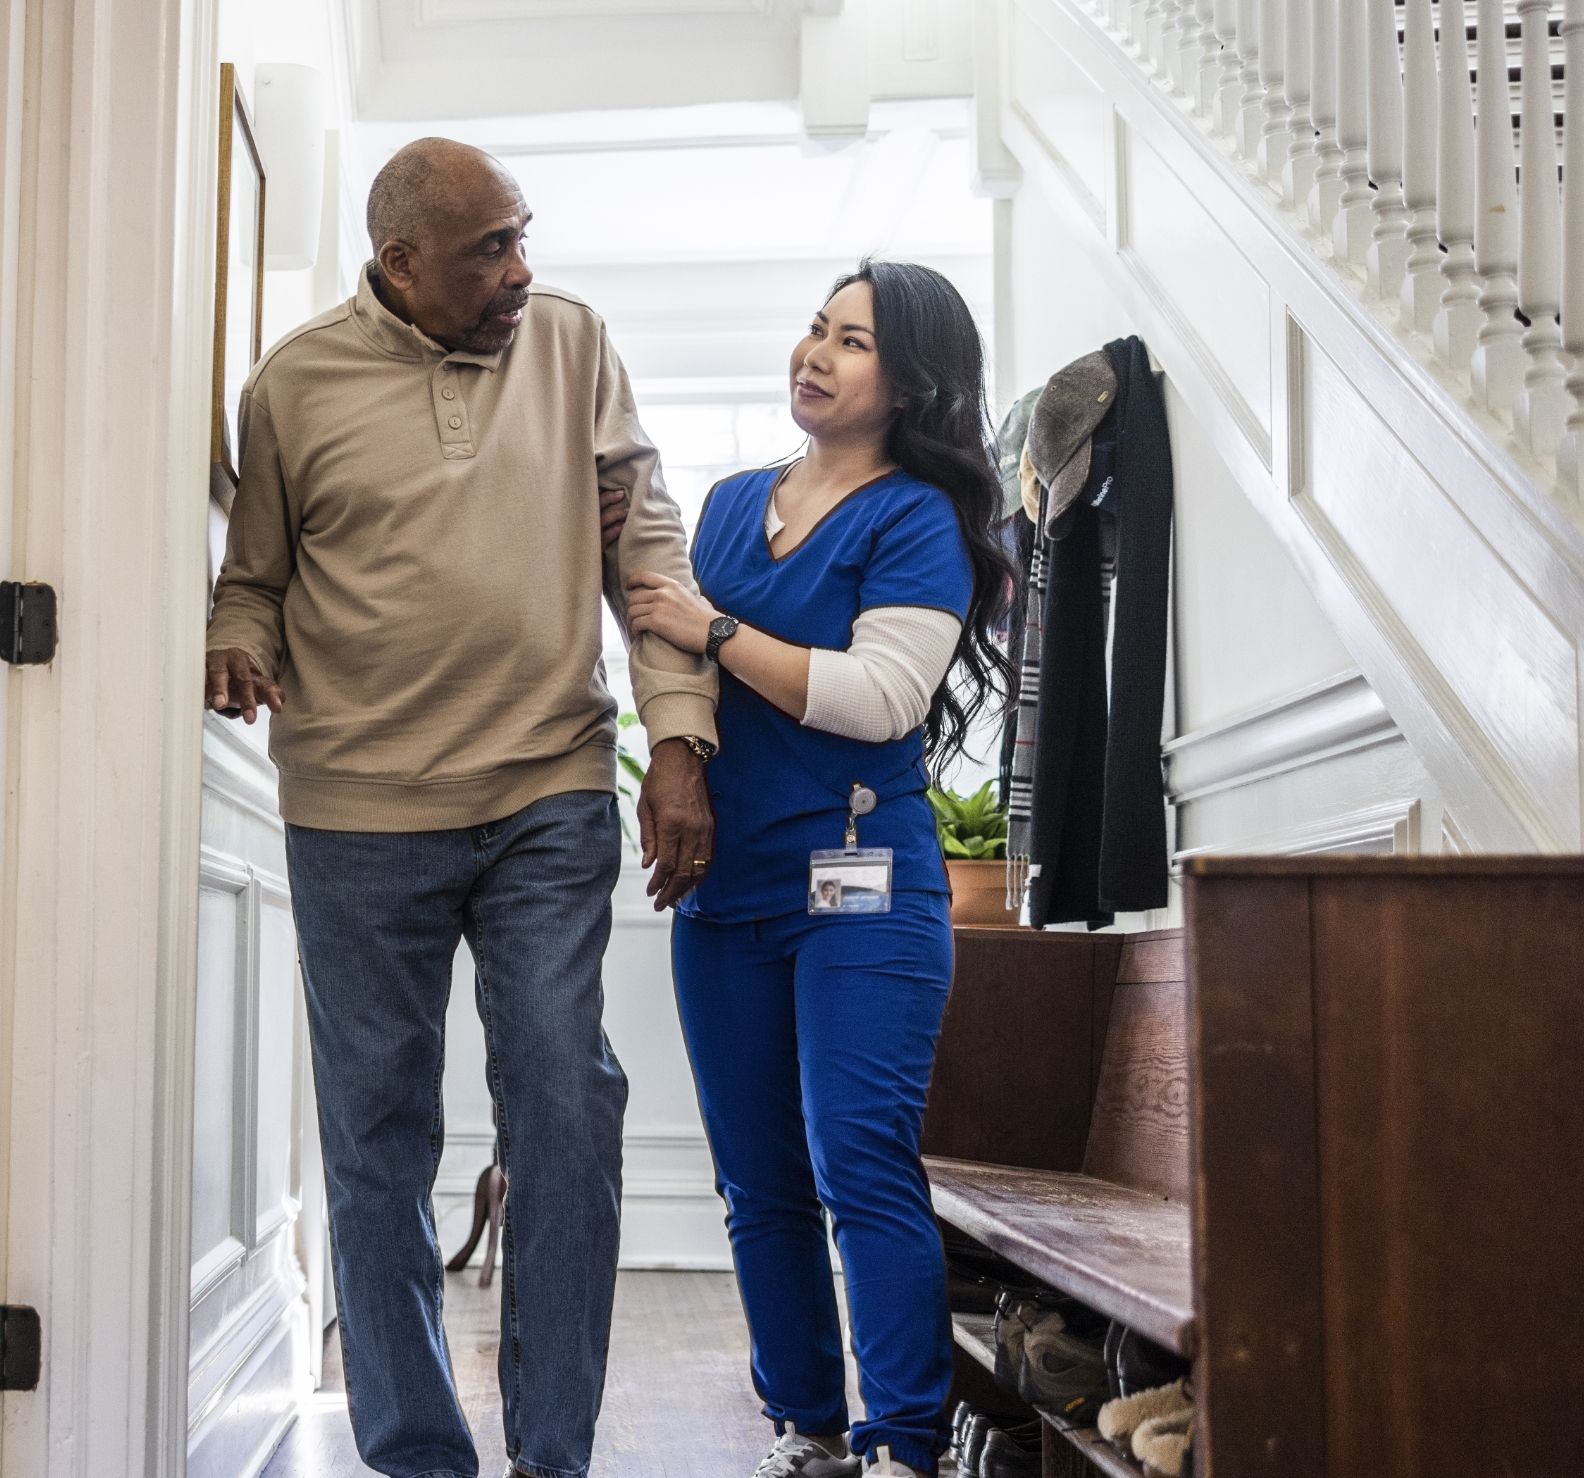 Home health aide helps older adult walk in his house.